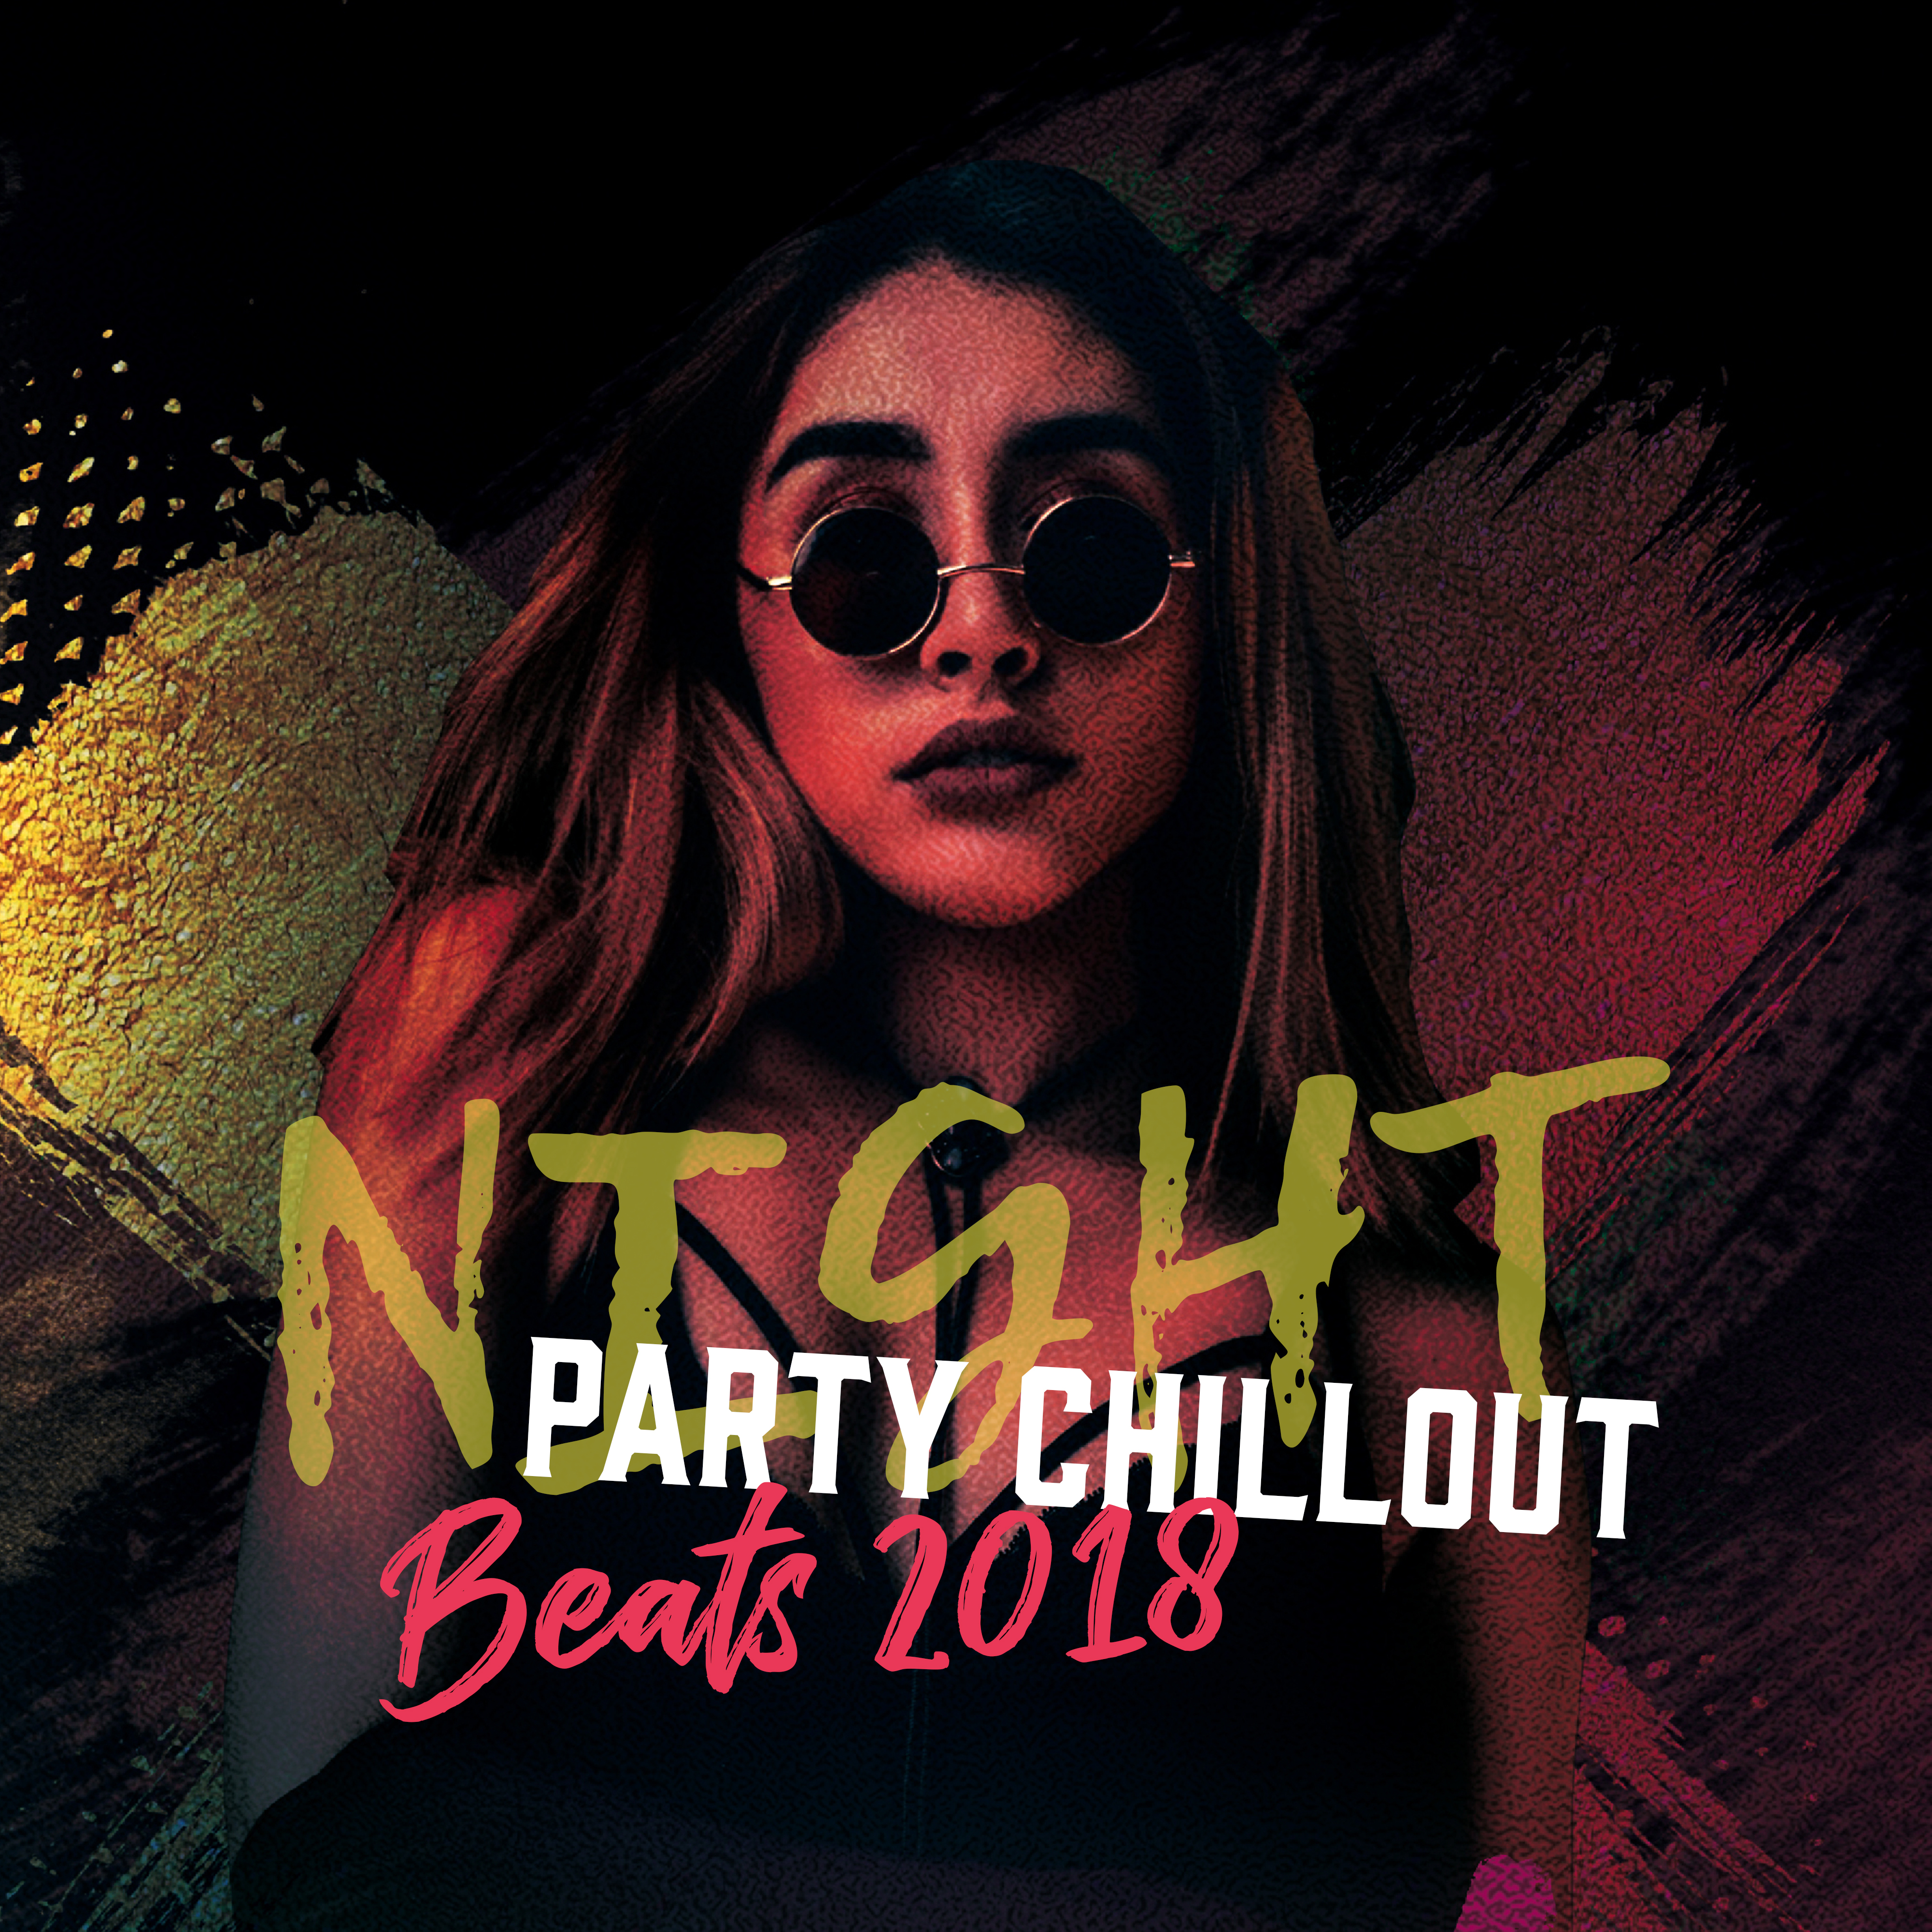 Night Party Chillout Beats 2018